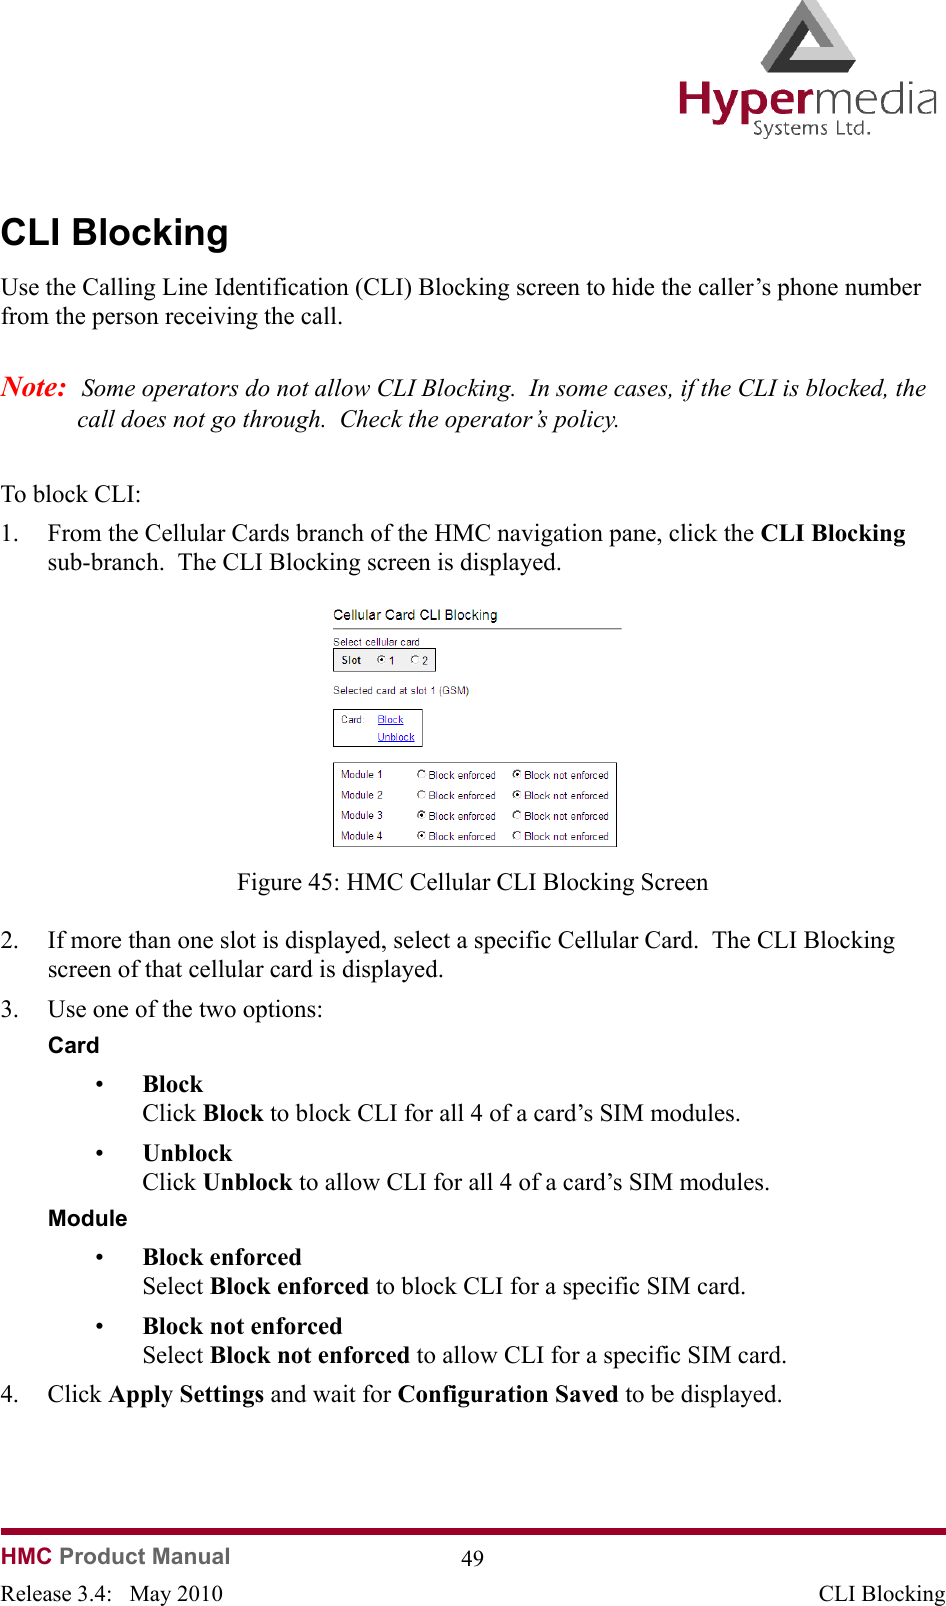 HMC Product Manual  49Release 3.4:   May 2010 CLI BlockingCLI BlockingUse the Calling Line Identification (CLI) Blocking screen to hide the caller’s phone number from the person receiving the call.Note:  Some operators do not allow CLI Blocking.  In some cases, if the CLI is blocked, the call does not go through.  Check the operator’s policy.To block CLI:1. From the Cellular Cards branch of the HMC navigation pane, click the CLI Blocking sub-branch.  The CLI Blocking screen is displayed.              Figure 45: HMC Cellular CLI Blocking Screen2. If more than one slot is displayed, select a specific Cellular Card.  The CLI Blocking screen of that cellular card is displayed.3. Use one of the two options: Card •Block  Click Block to block CLI for all 4 of a card’s SIM modules.•Unblock  Click Unblock to allow CLI for all 4 of a card’s SIM modules.Module•Block enforced  Select Block enforced to block CLI for a specific SIM card.•Block not enforced  Select Block not enforced to allow CLI for a specific SIM card.4. Click Apply Settings and wait for Configuration Saved to be displayed.